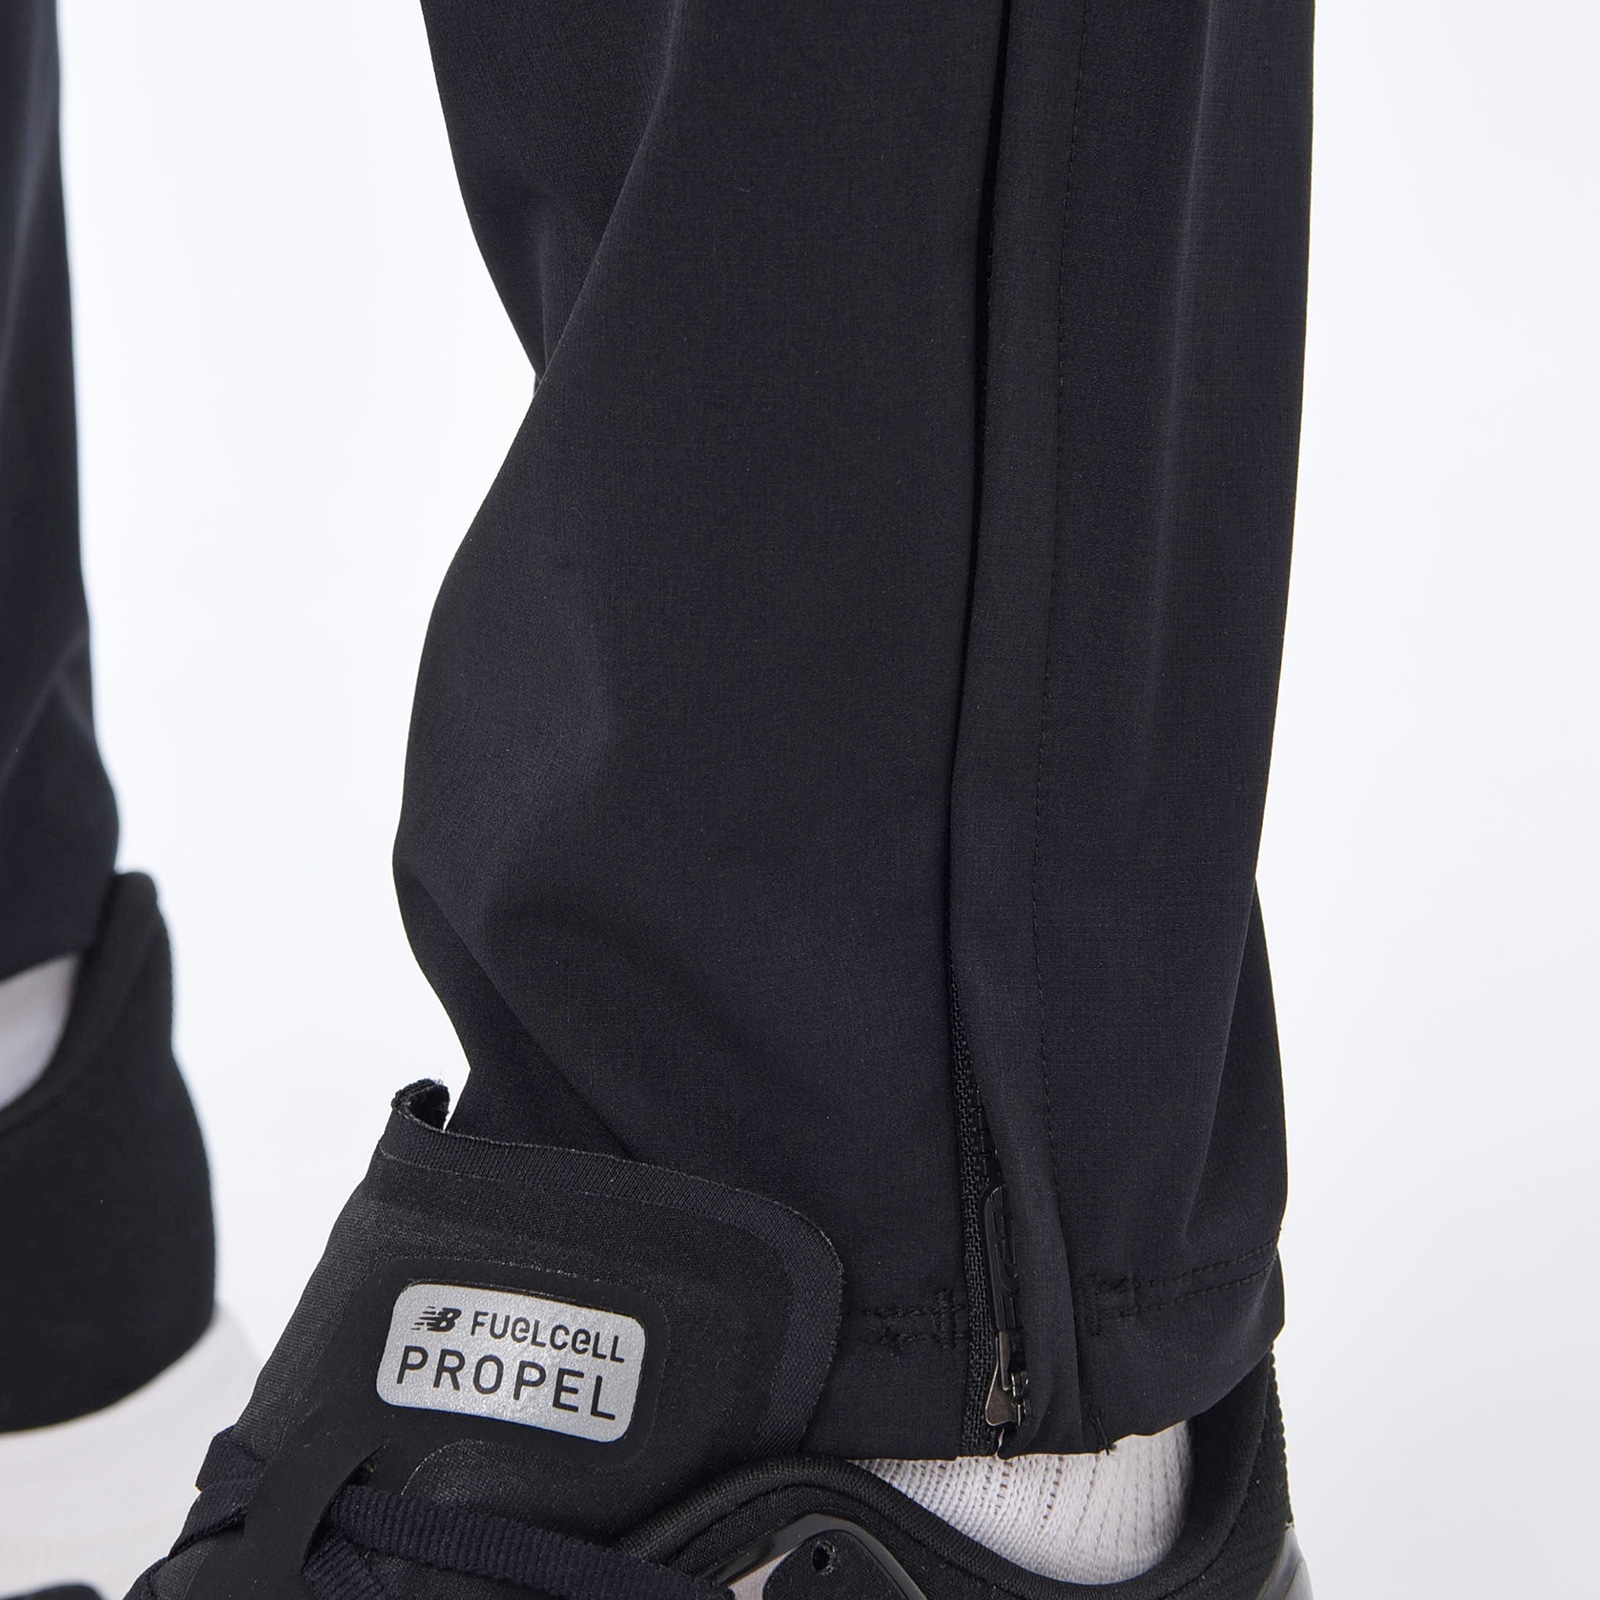 Black Out Collection Premier Collection Pants Relaxed Fit